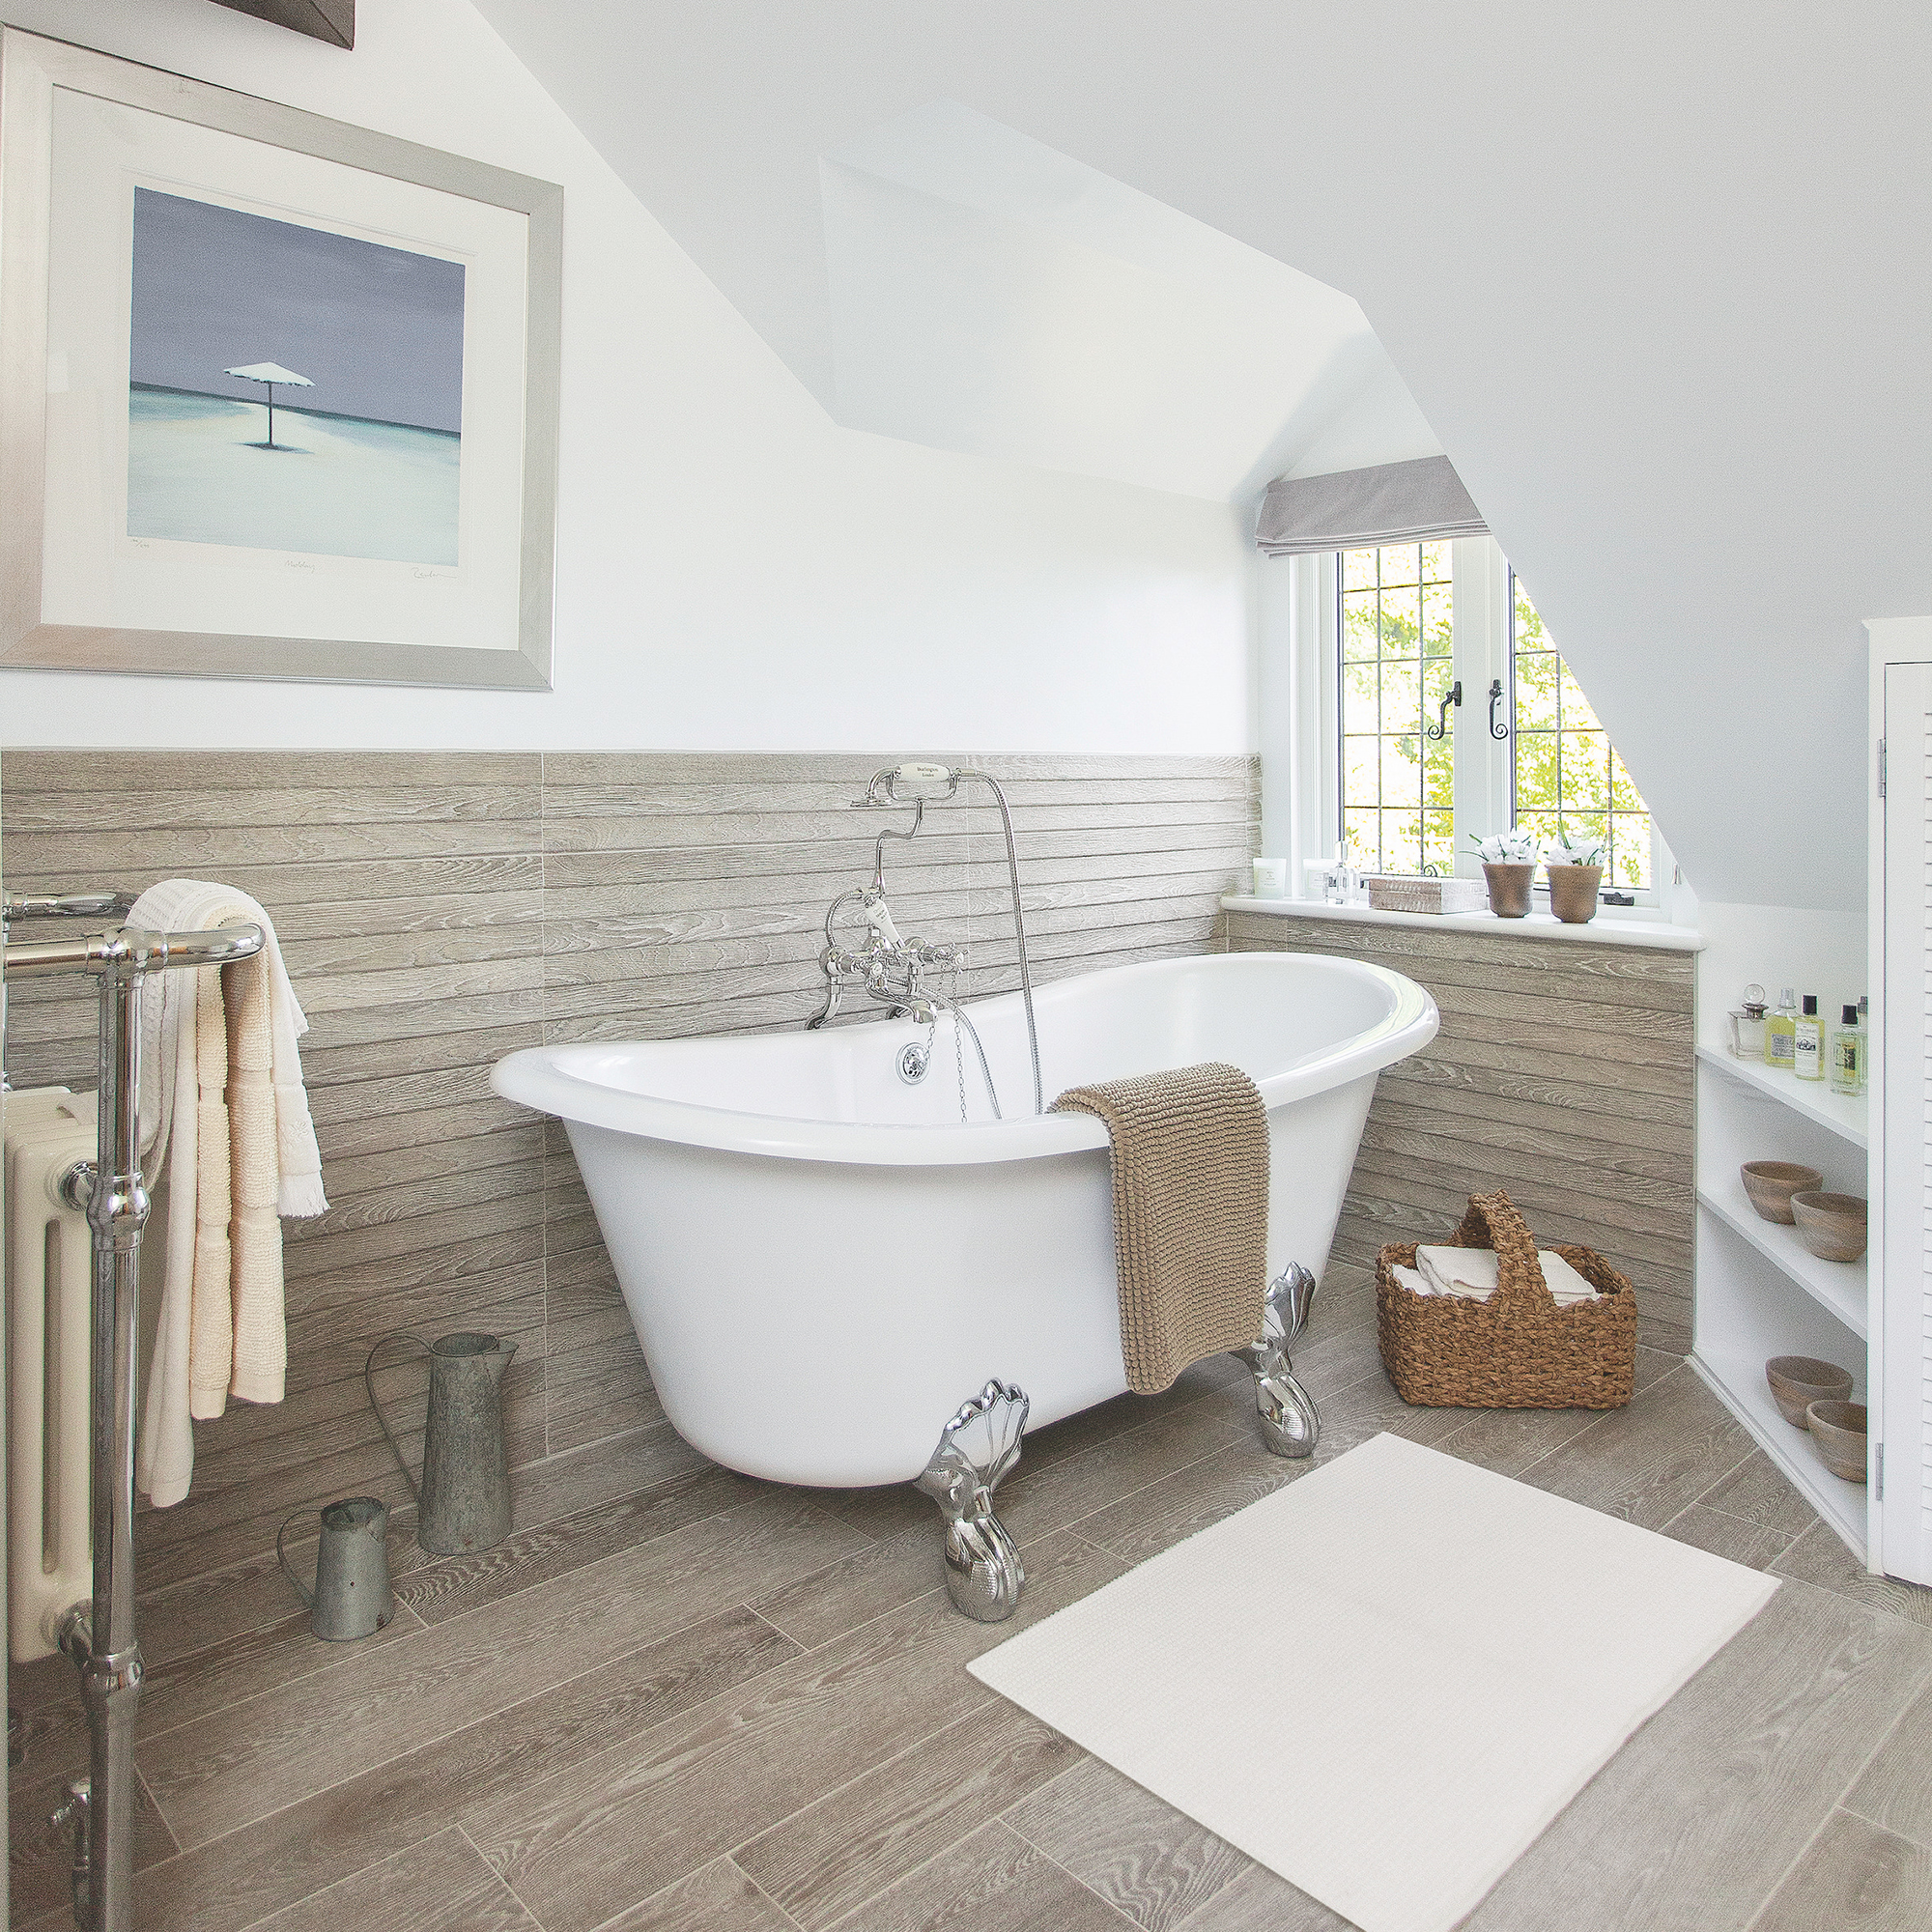 Modern country bathroom with wood-effect tiles on the wall and floor